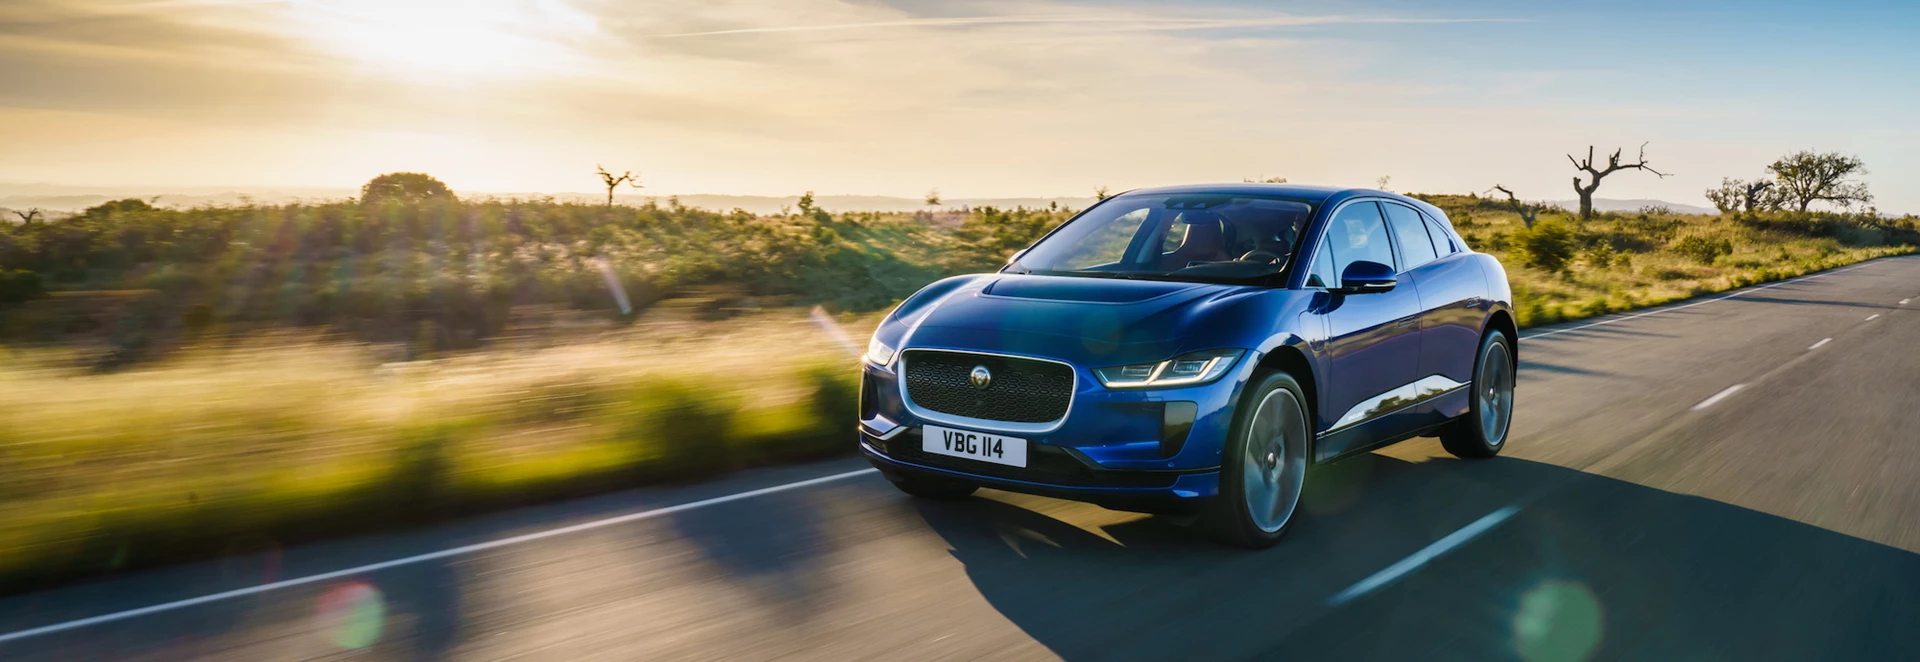 Jaguar I-Pace - We take Jaguar’s first all-electric car for a spin